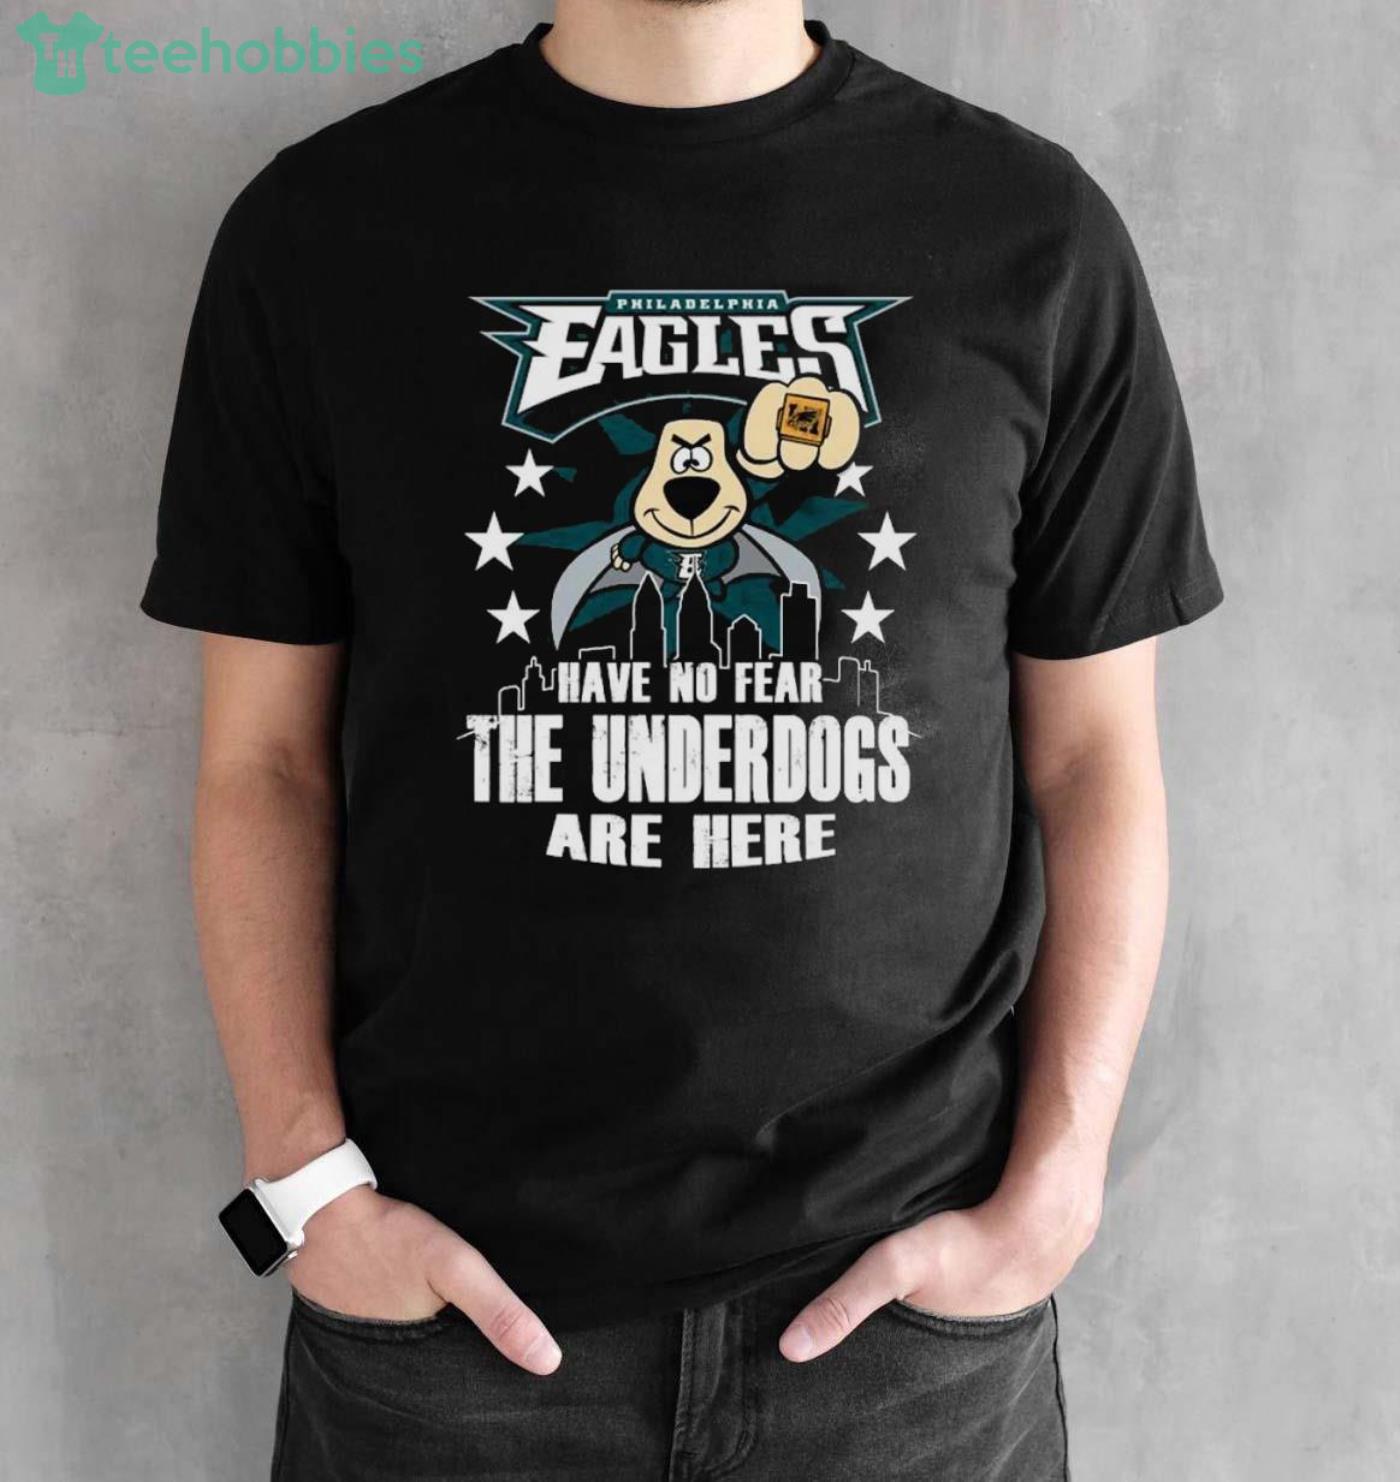 Have No Fear The Underdogs Are Here Philadelphia Eagles T-Shirt - Black Unisex T-Shirt